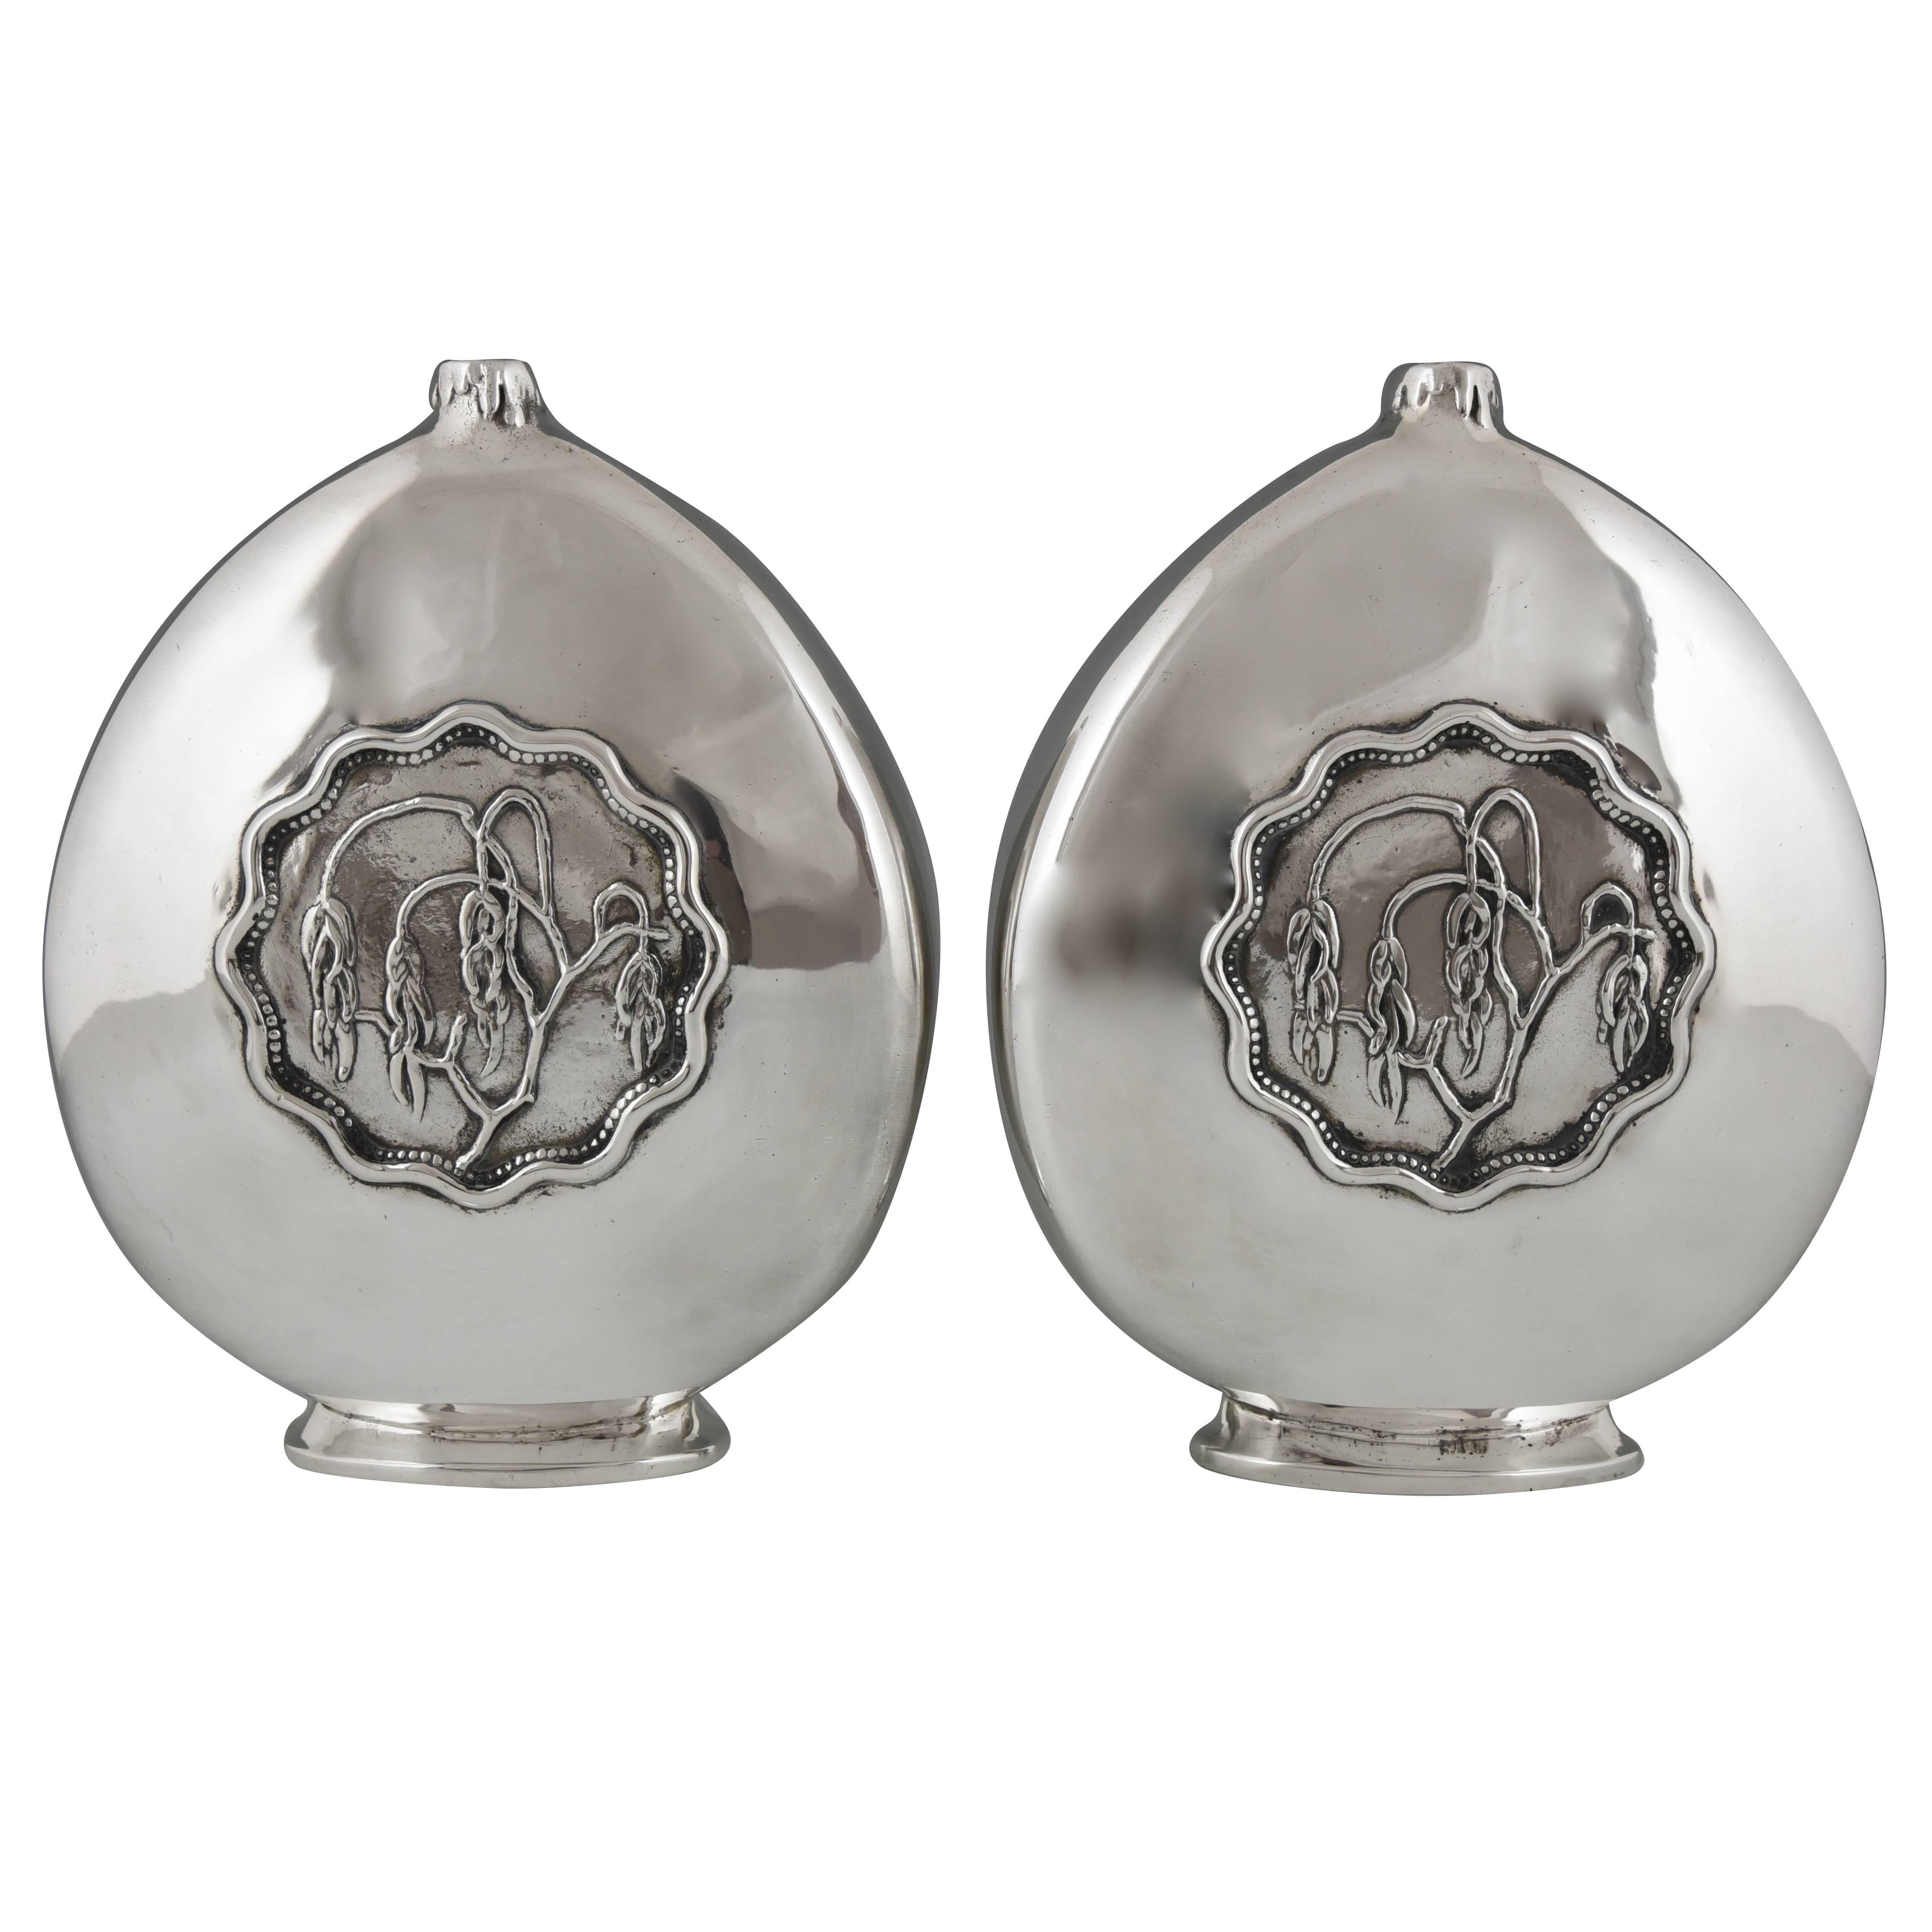 French Pair of Silvered Bronze Art Deco Vases by G. Poitvin 1930